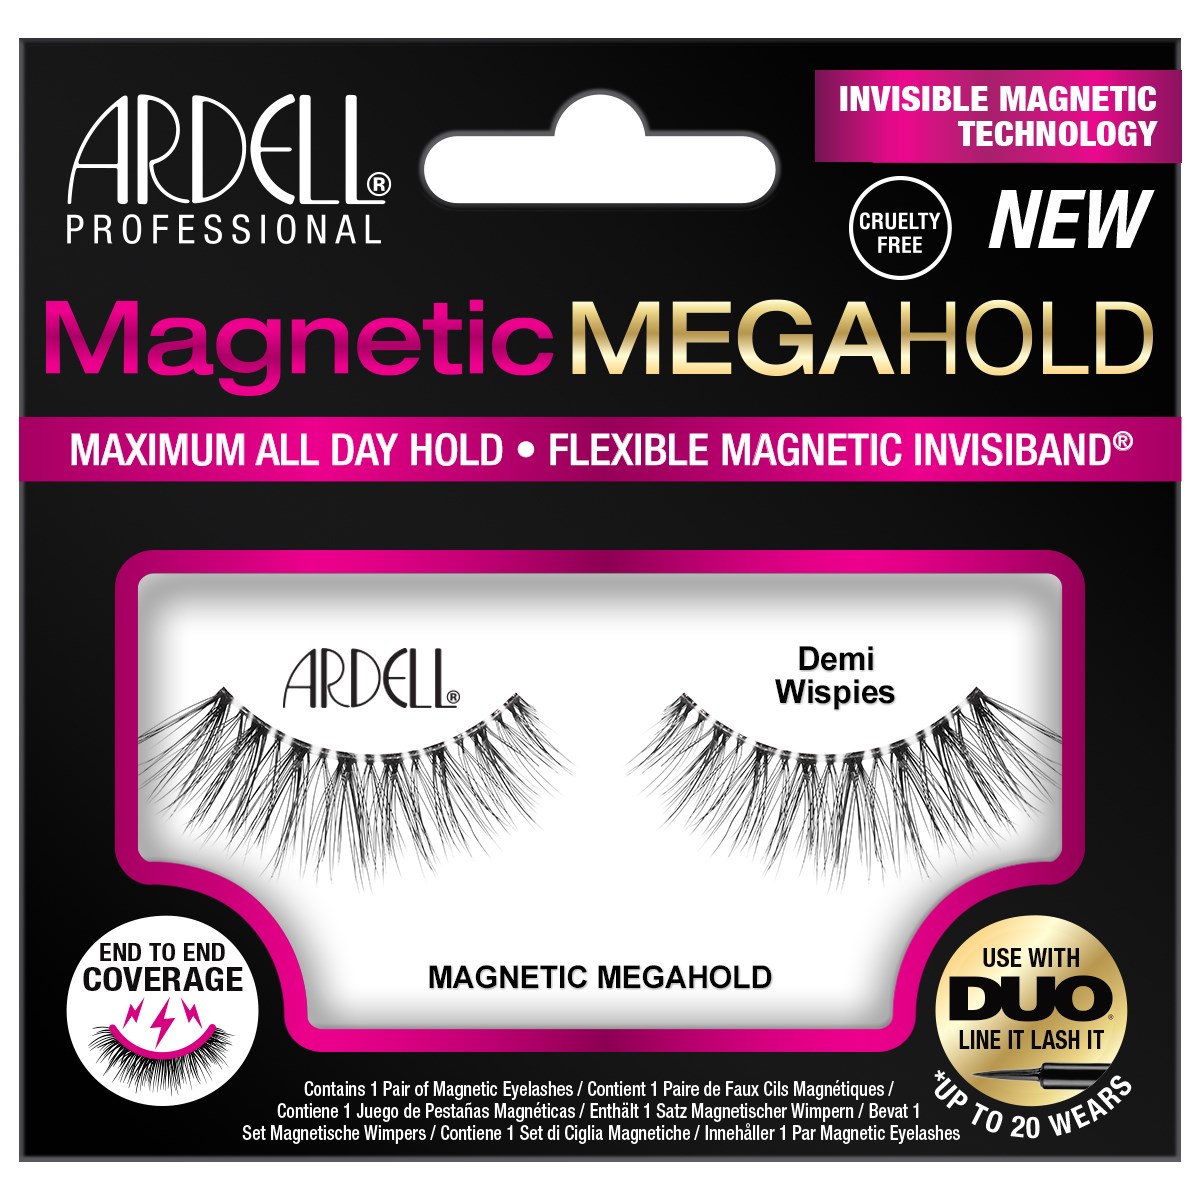 Ardell Magnetic Megahold Demi Wispies